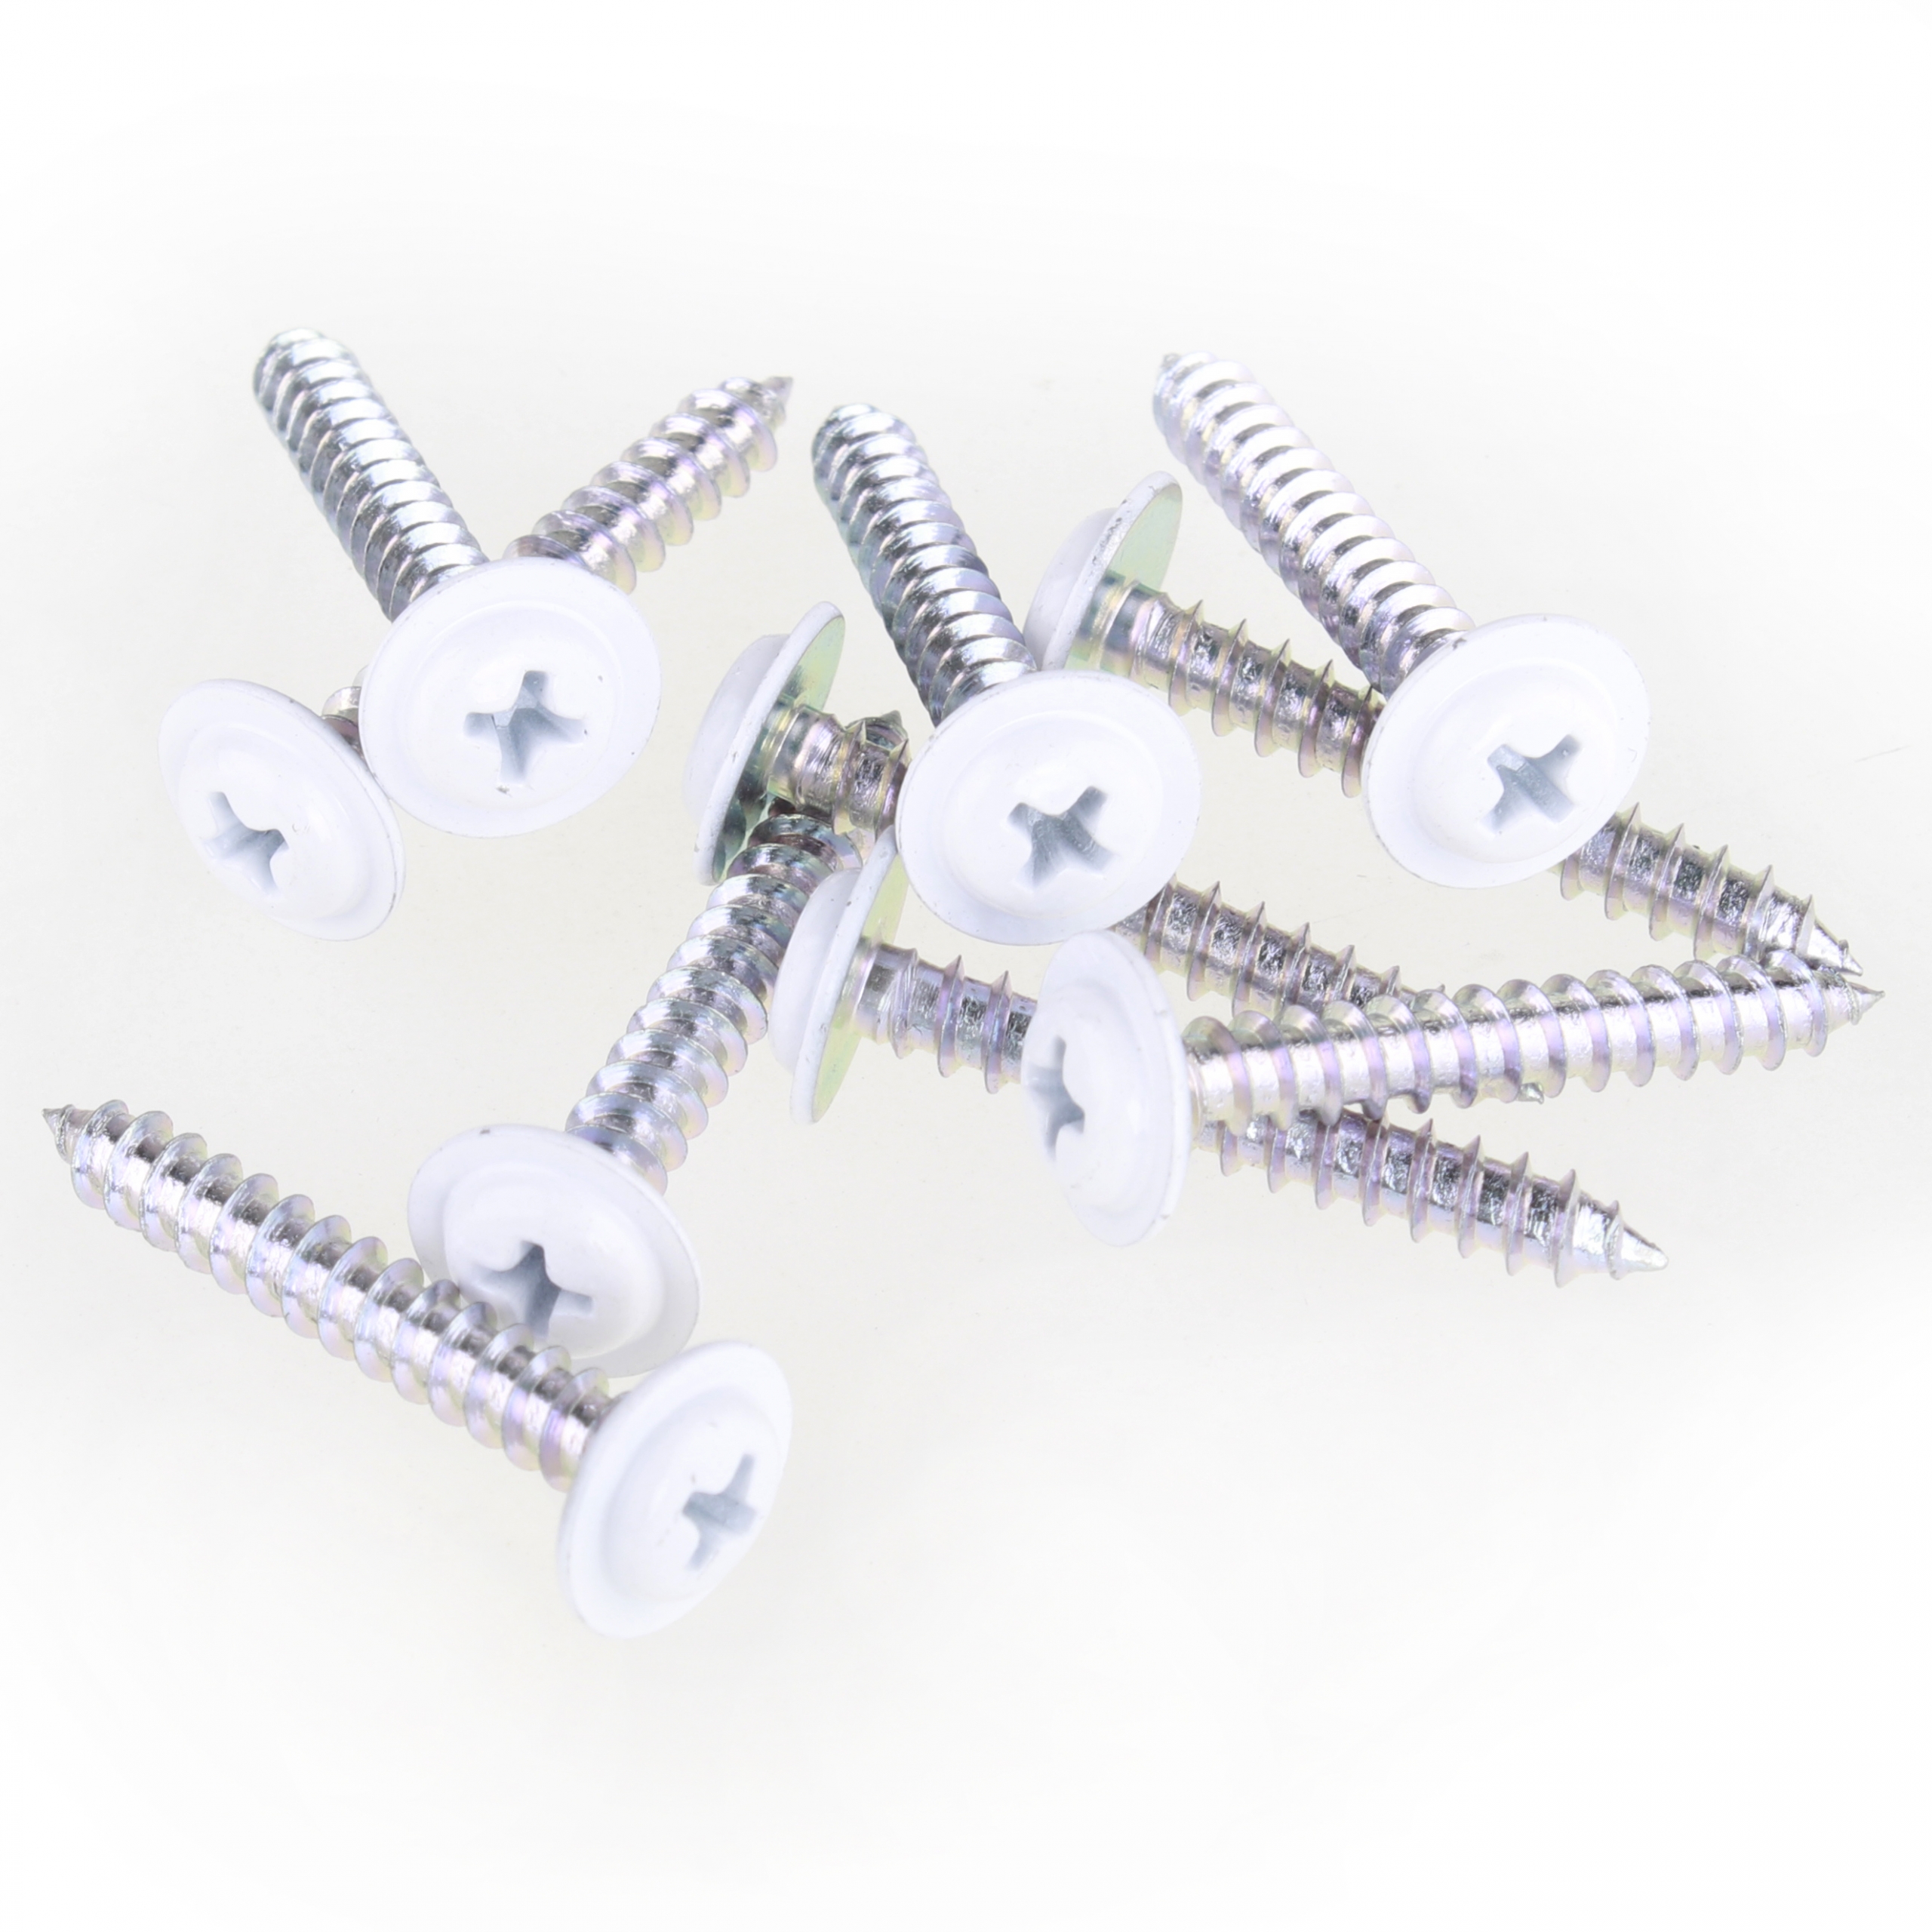 Micro stainless steel cross philips wood roofing self tapping screw